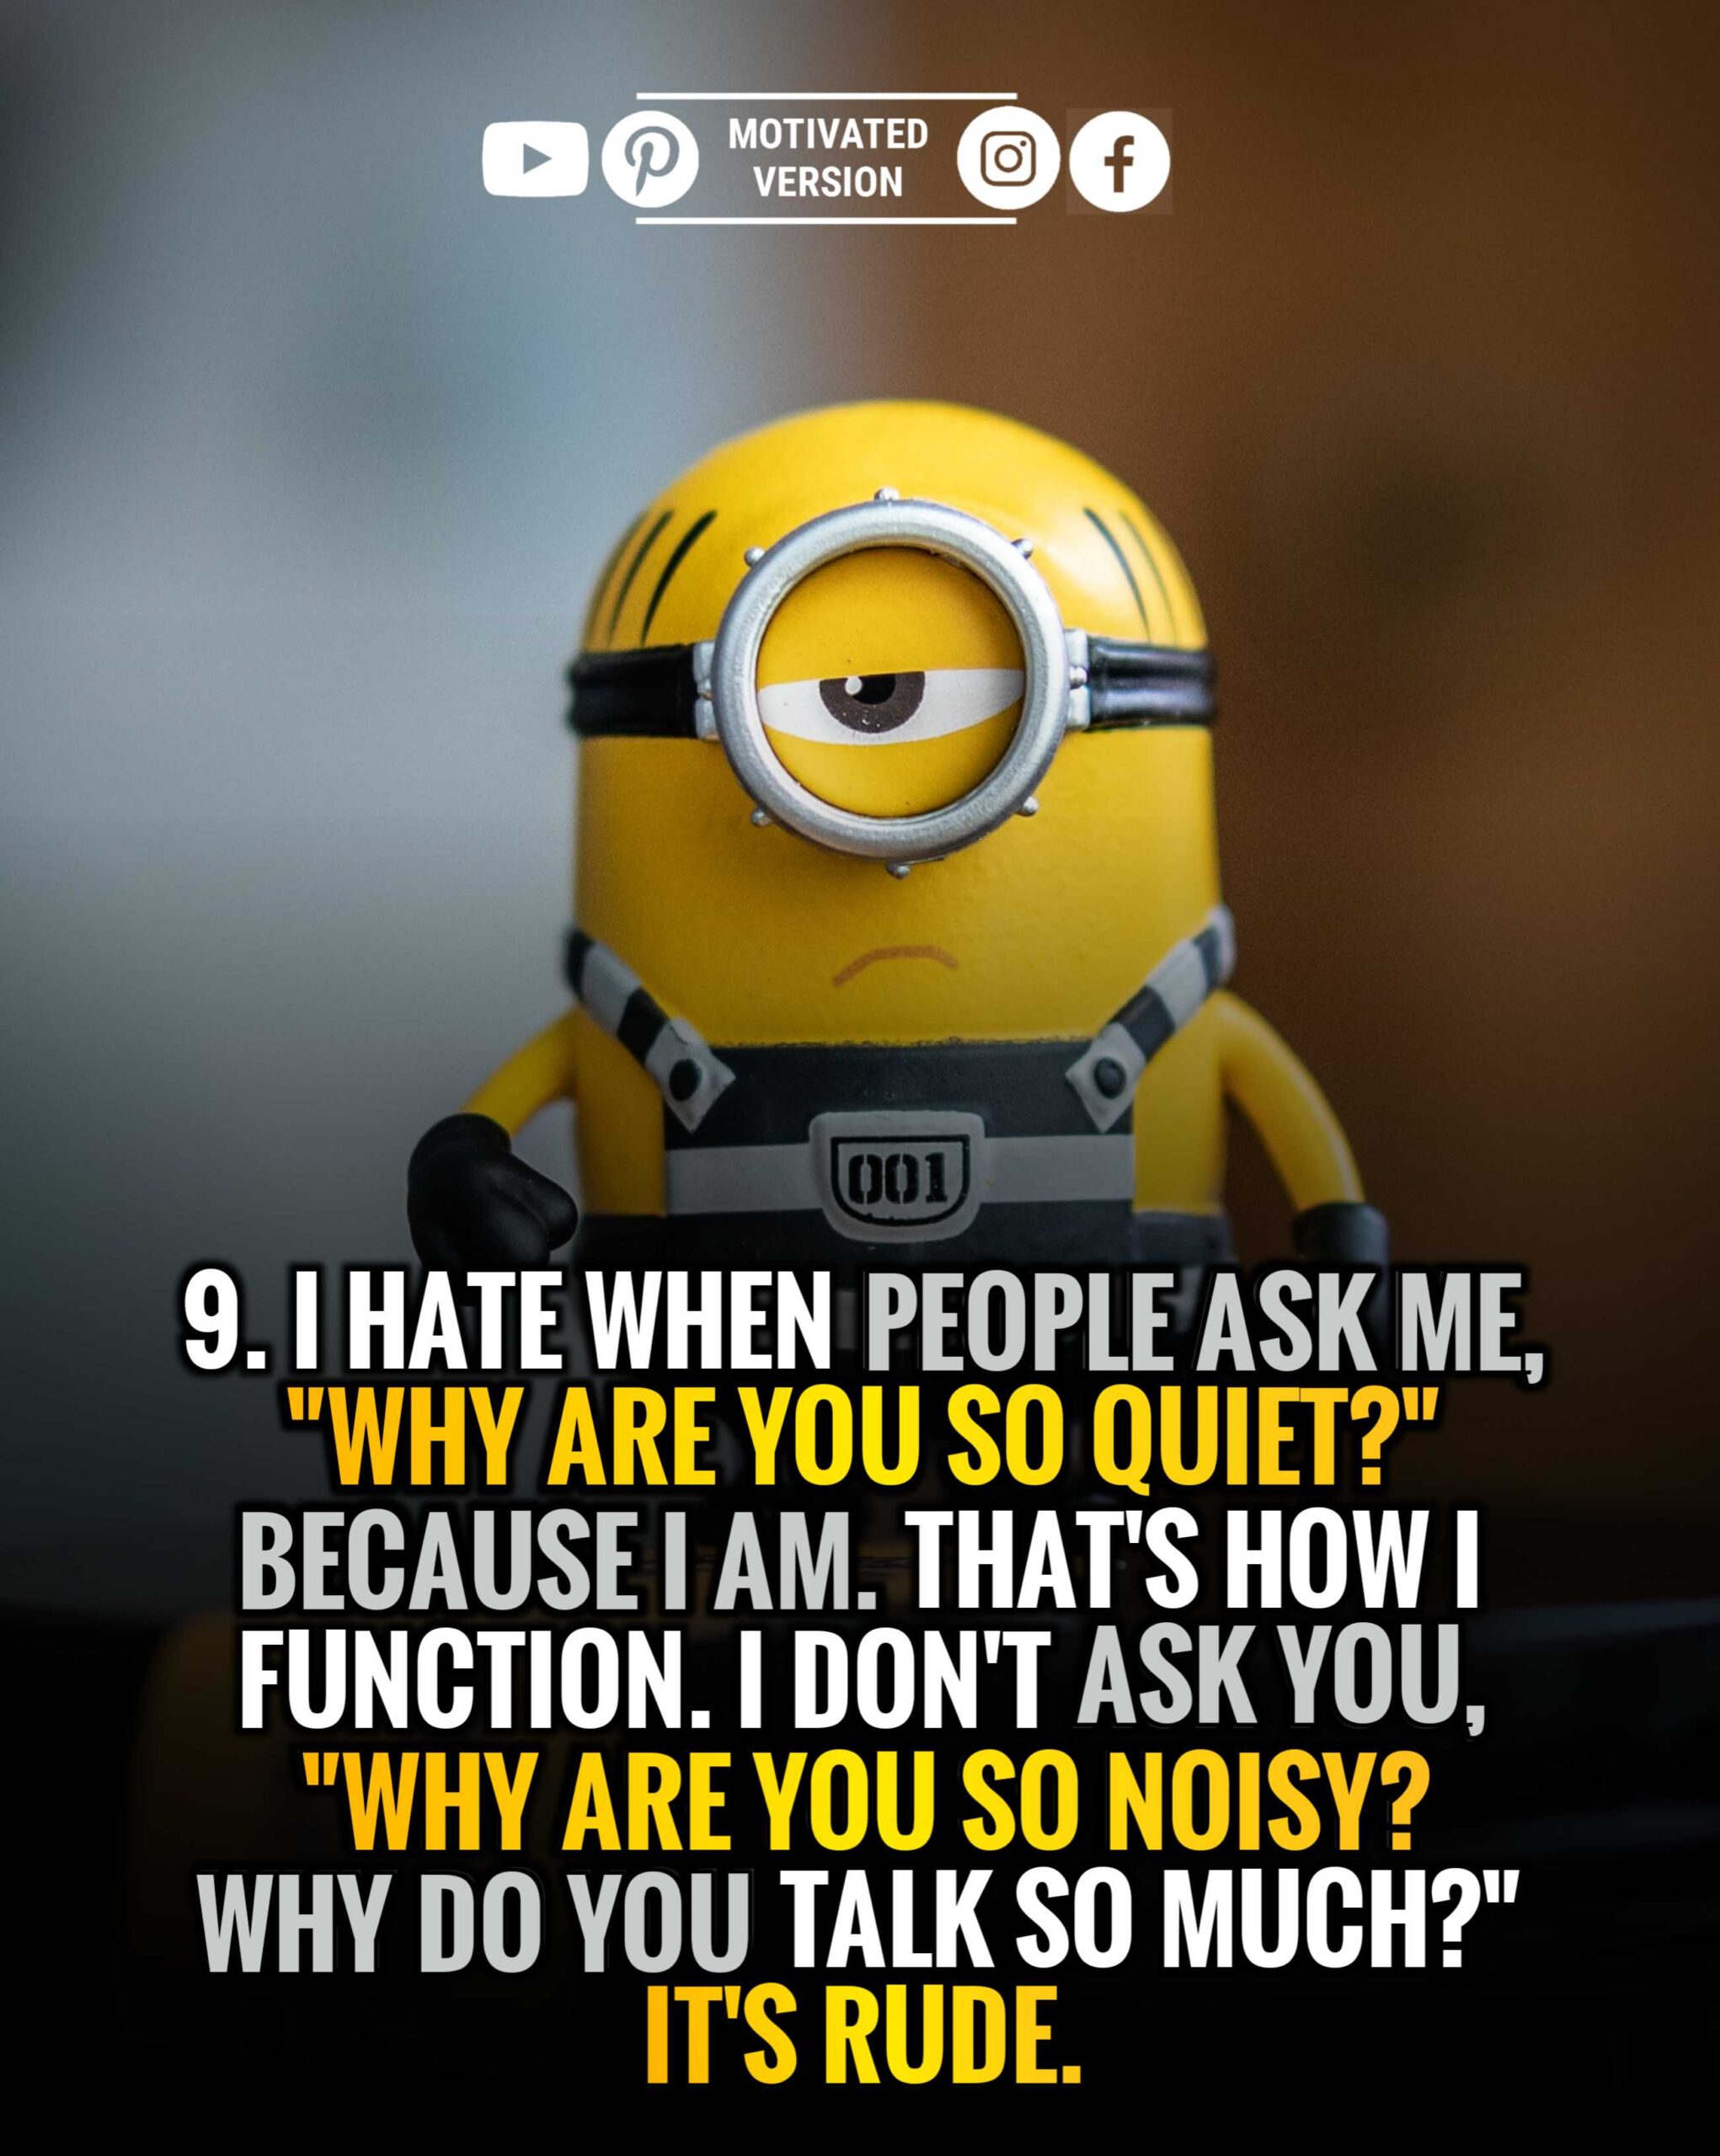 I hate when people ask me, "Why are you so quiet?" Because I am. That's how I function. I don't ask you, "Why are you so noisy? Why do you talk so much?" It's rude.